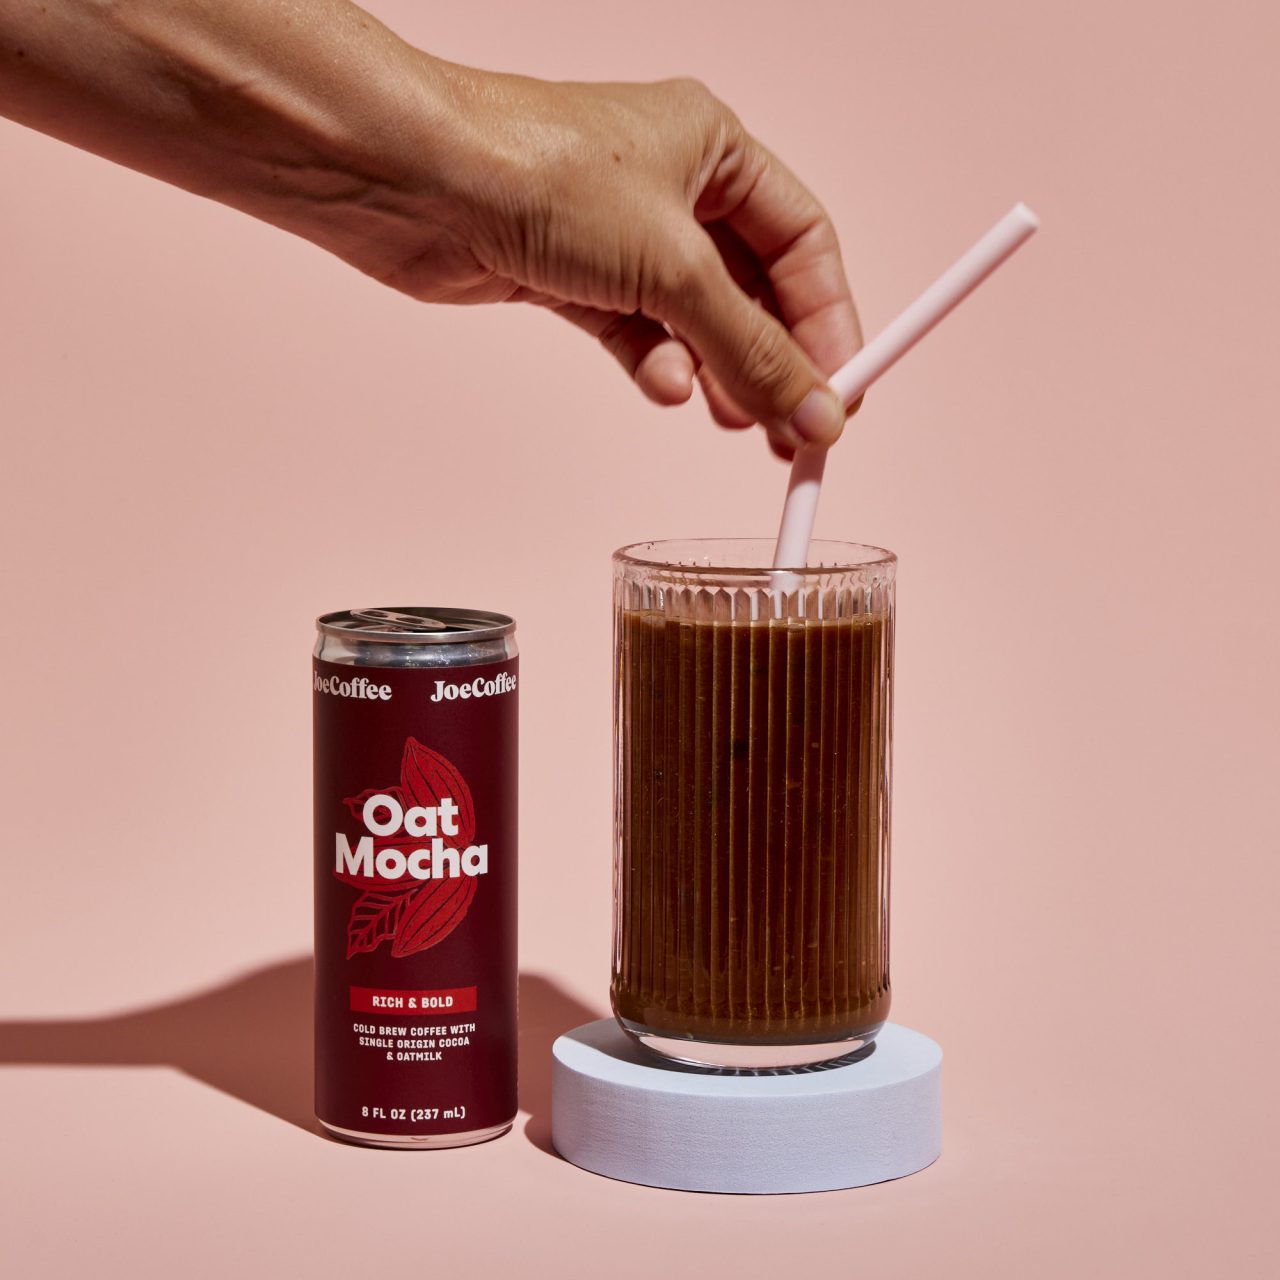 Oat mocha can and cup side by side with a hand inserting a straw into the cup